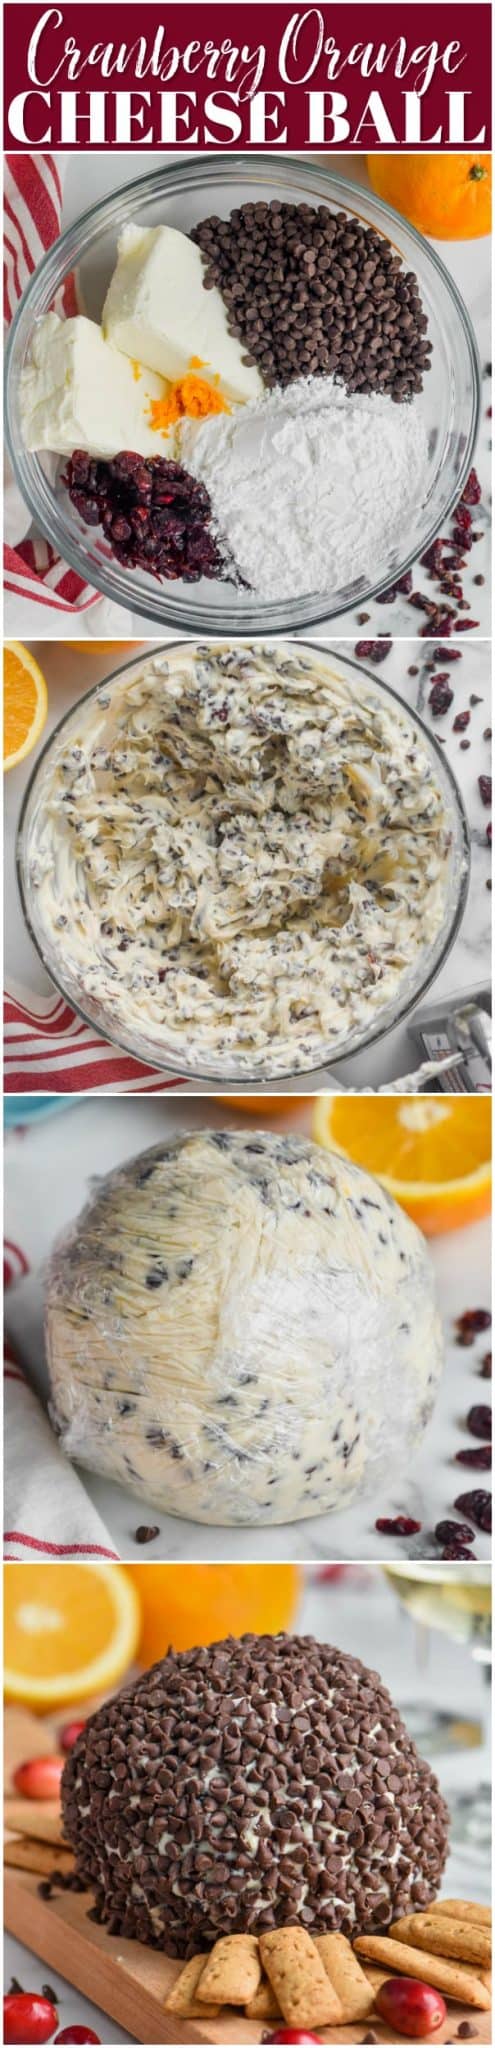 collage of how to make a cheese ball